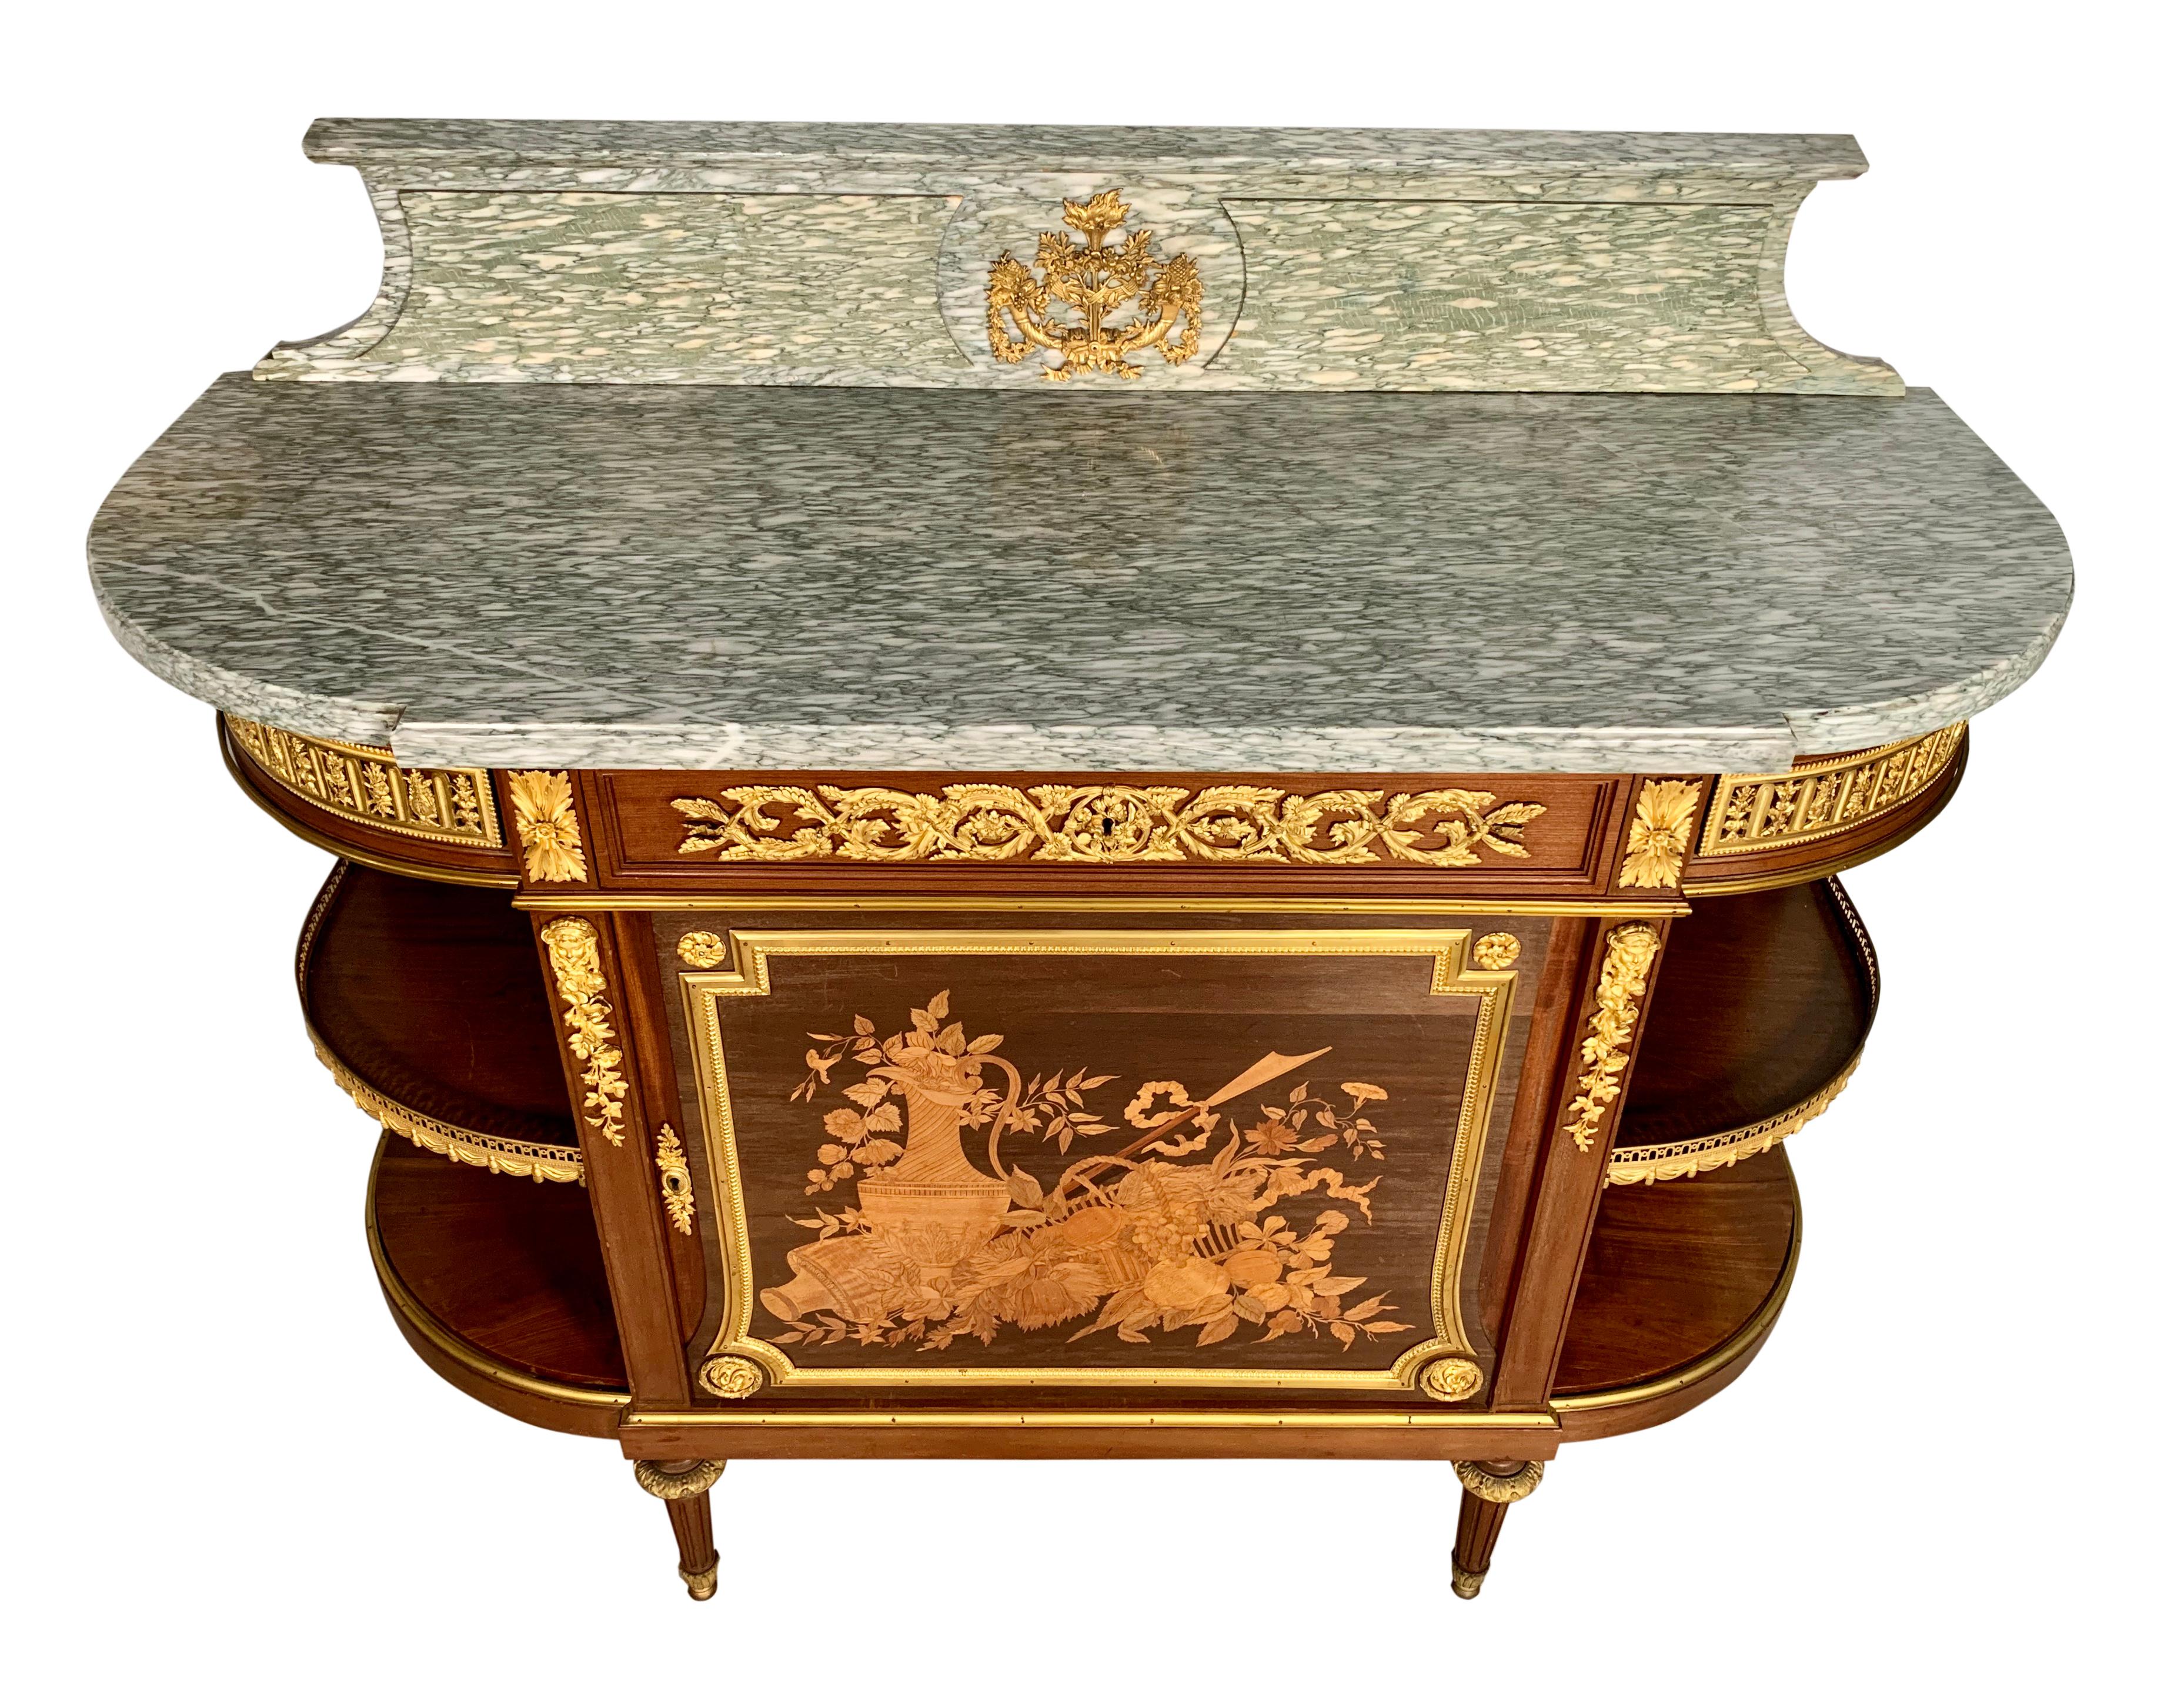 A high quality French ormolu-mounted mahogany, Amaranth and Marquetry marble top console Desserte - in the manner of Jean-Henri Riesener.
The D-shaped green Cippolino marble-top above a breakfront frieze centered with a drawer over a cupboard door